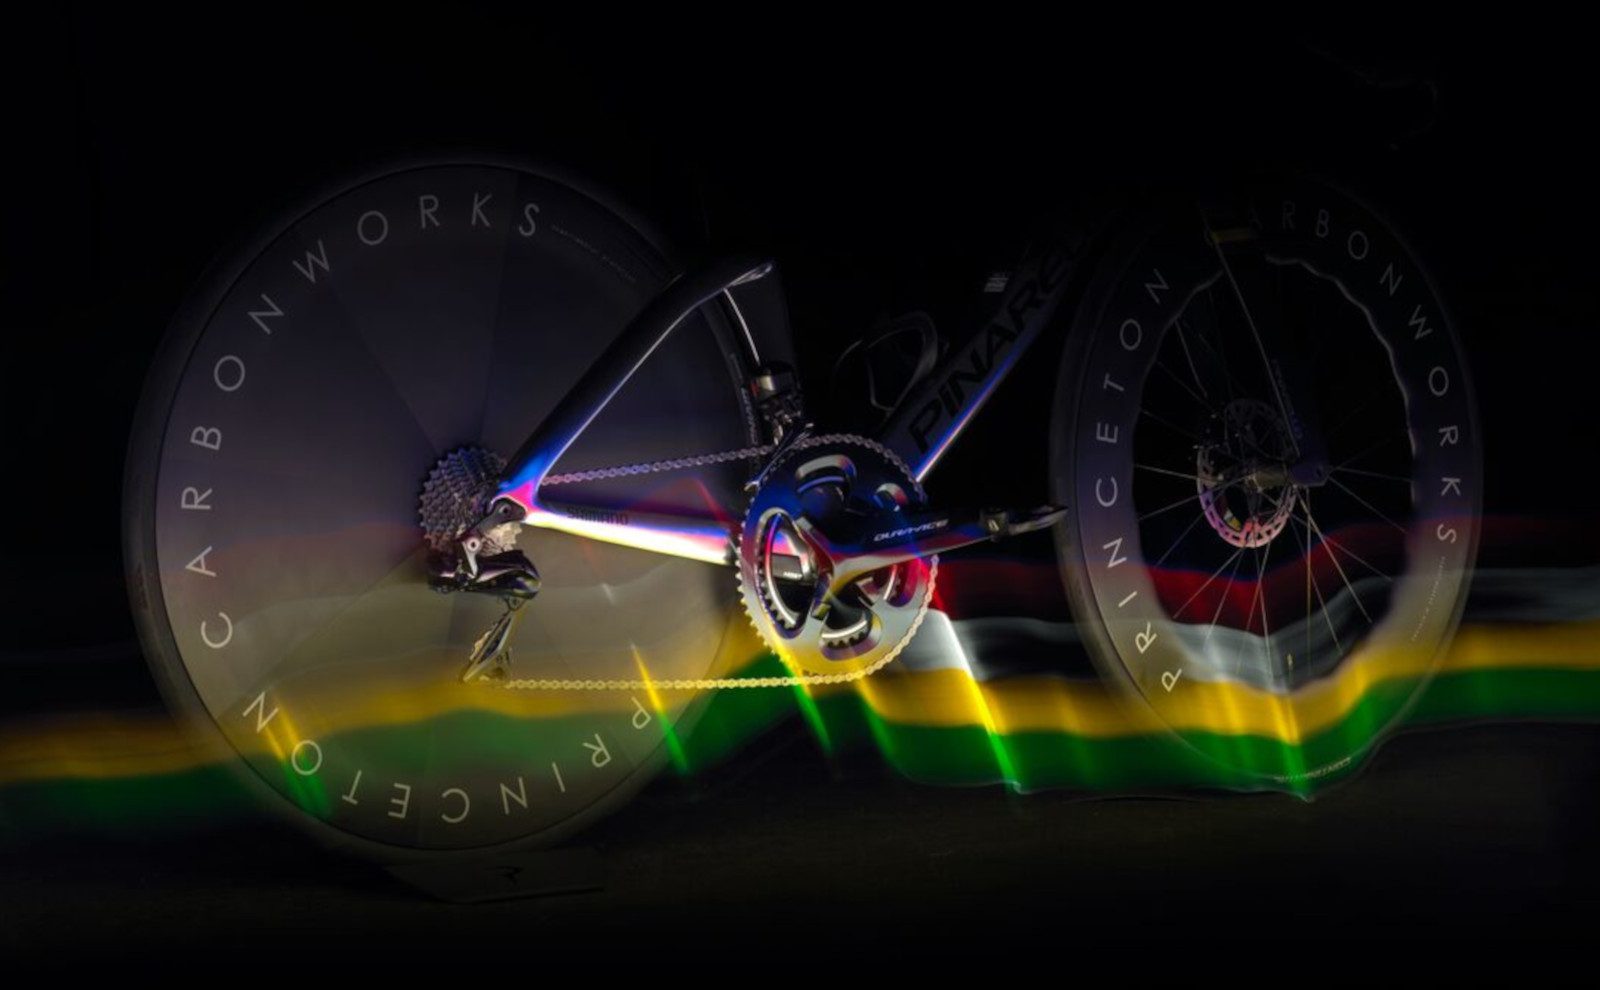 Pinarello takes aim at Hour Record with world's fastest 3D